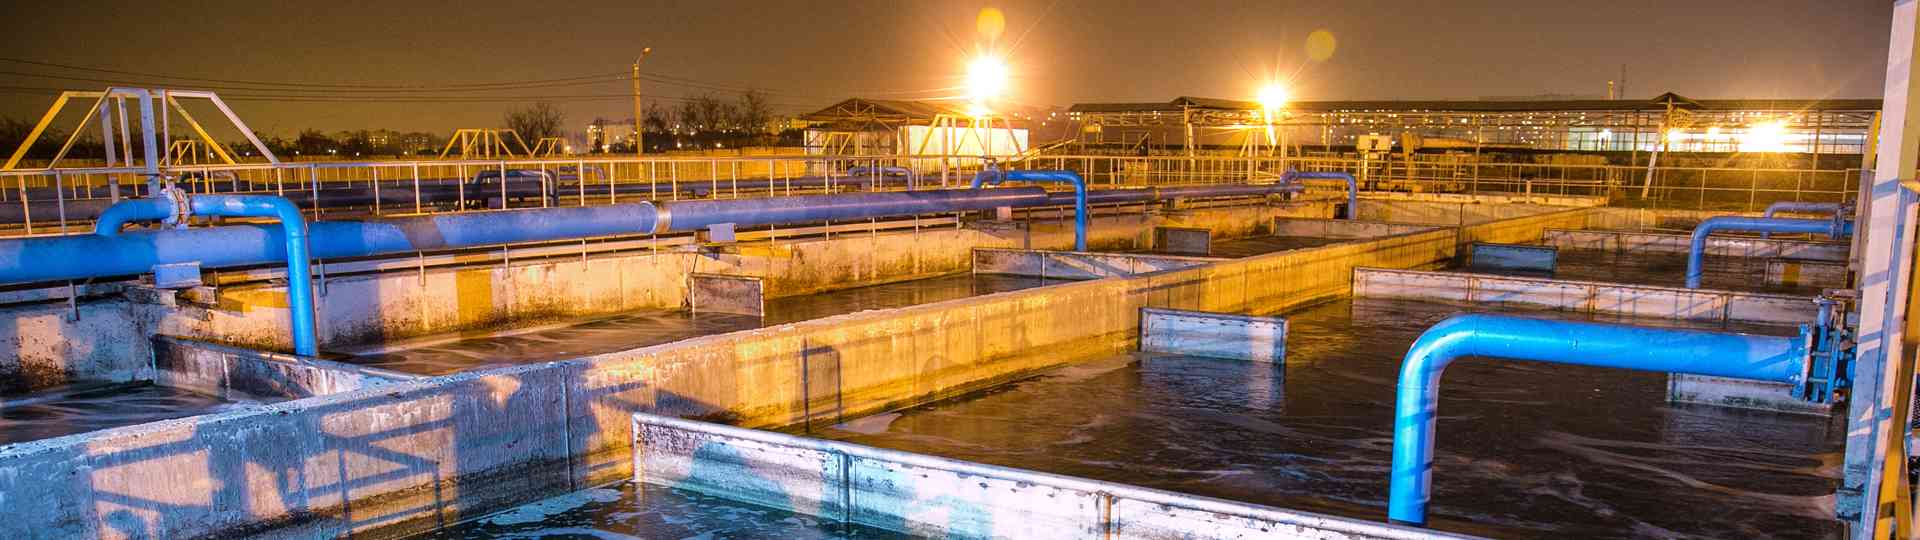 Water sector